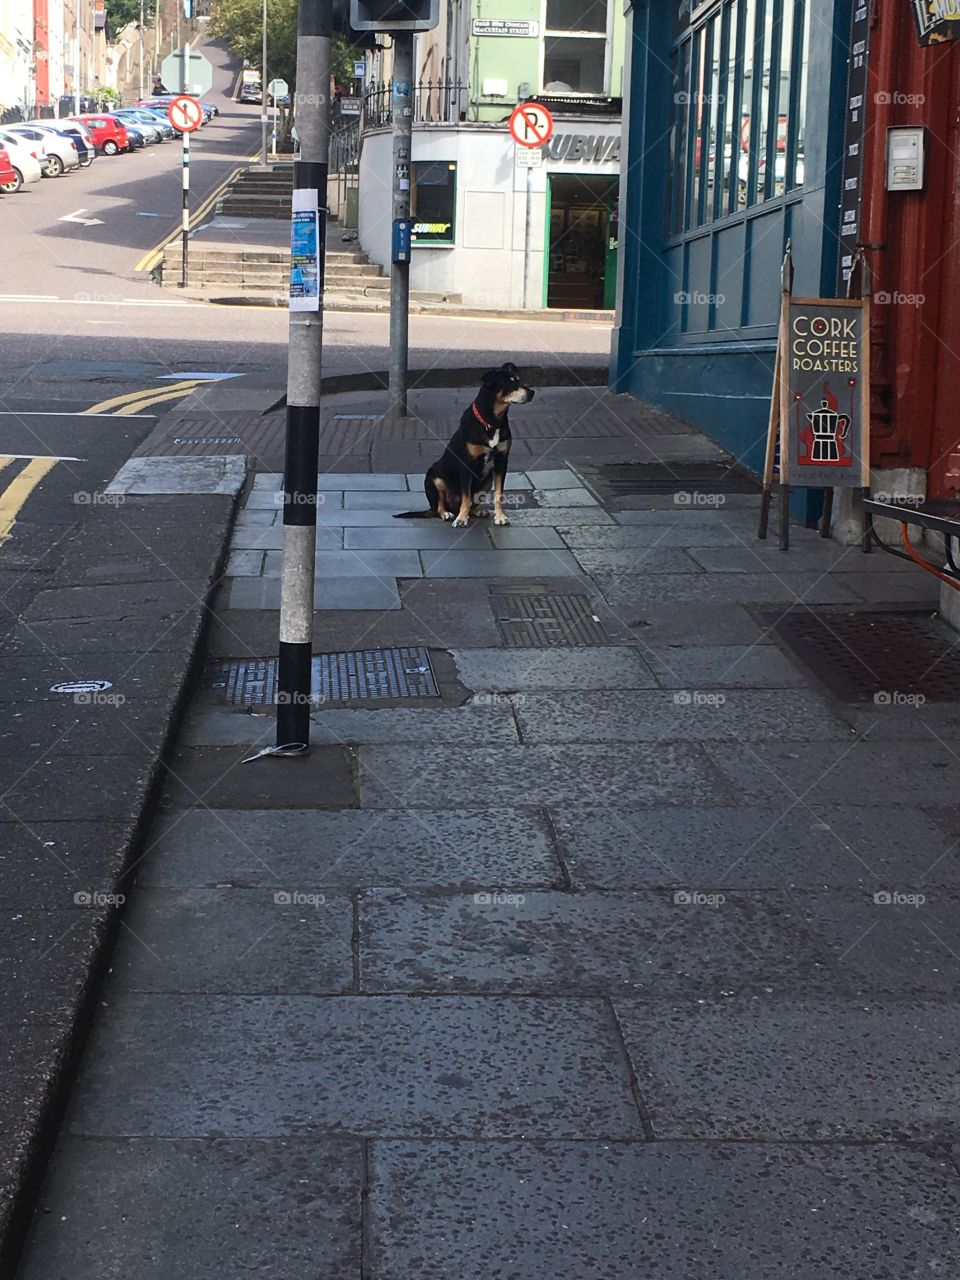 A loyal dog waiting for its owner outside a shop in Ireland 